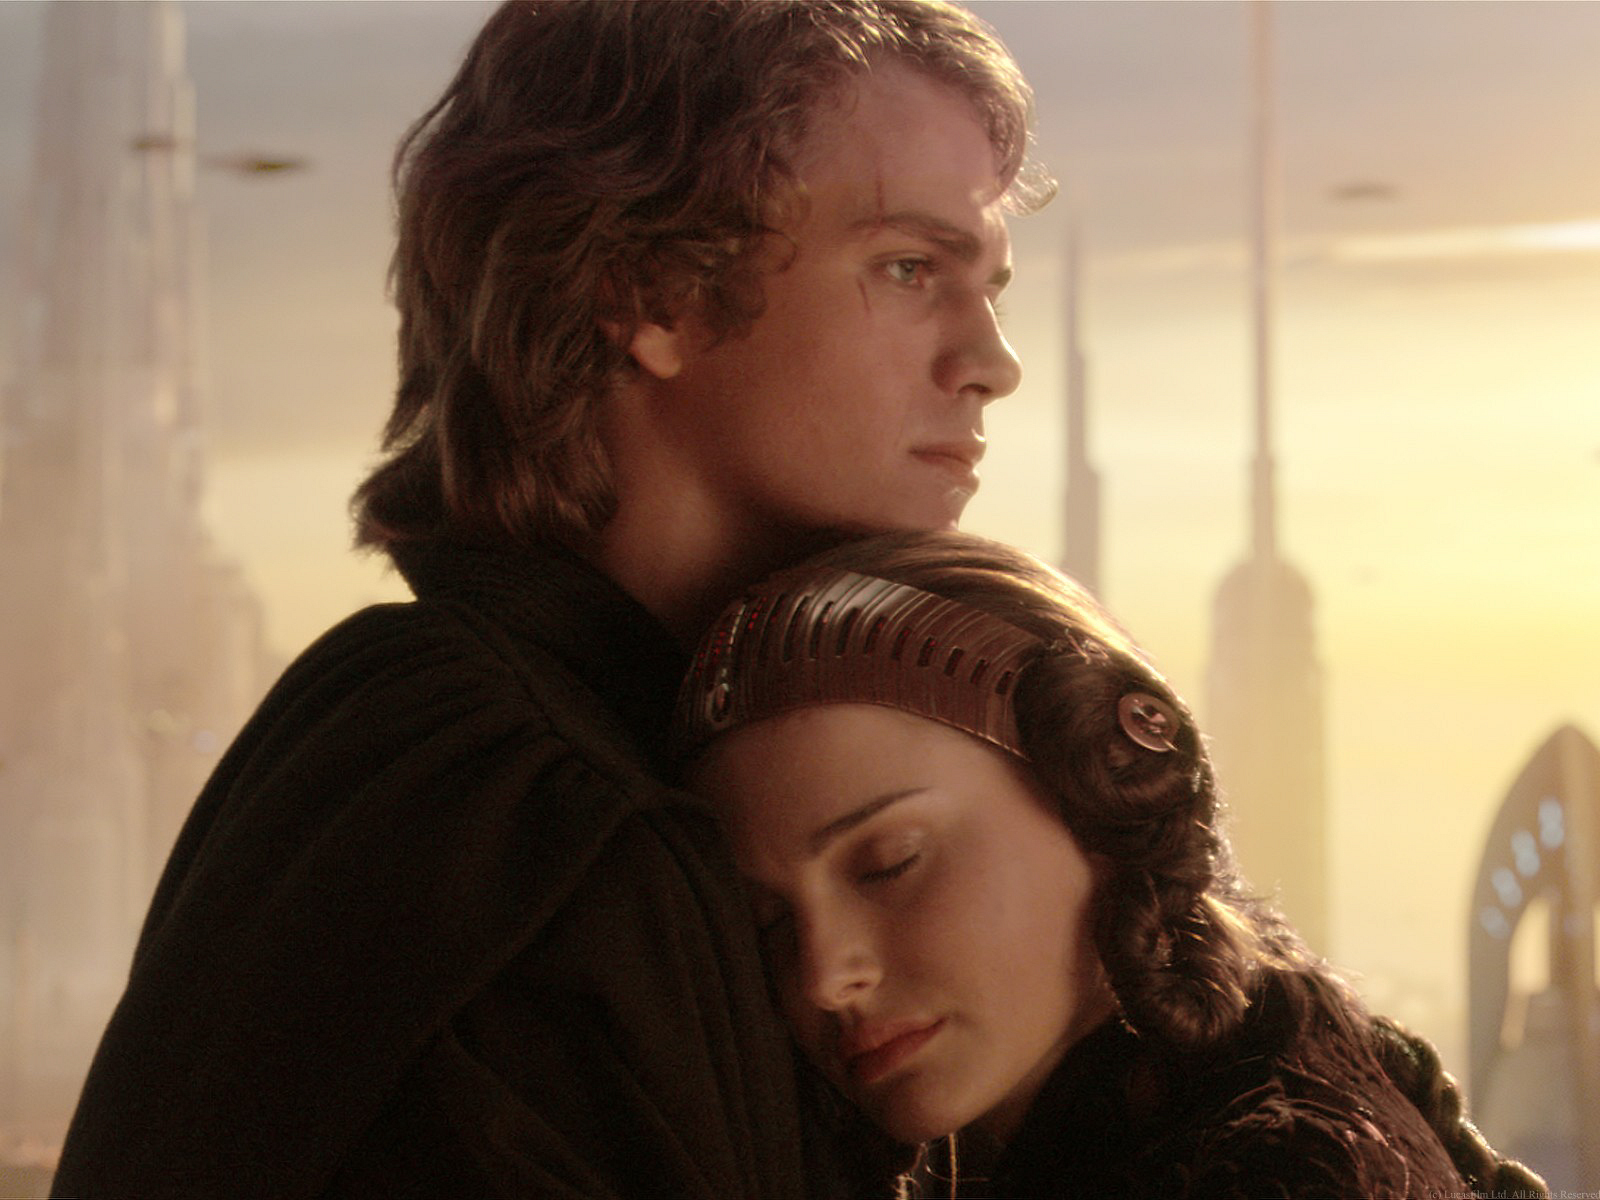 The image “http://www.thescifichristian.com/wp-content/uploads/2015/12/Anakin-and-Padme-in-Revenge-of-the-Sith.jpg” cannot be displayed because it contains errors.